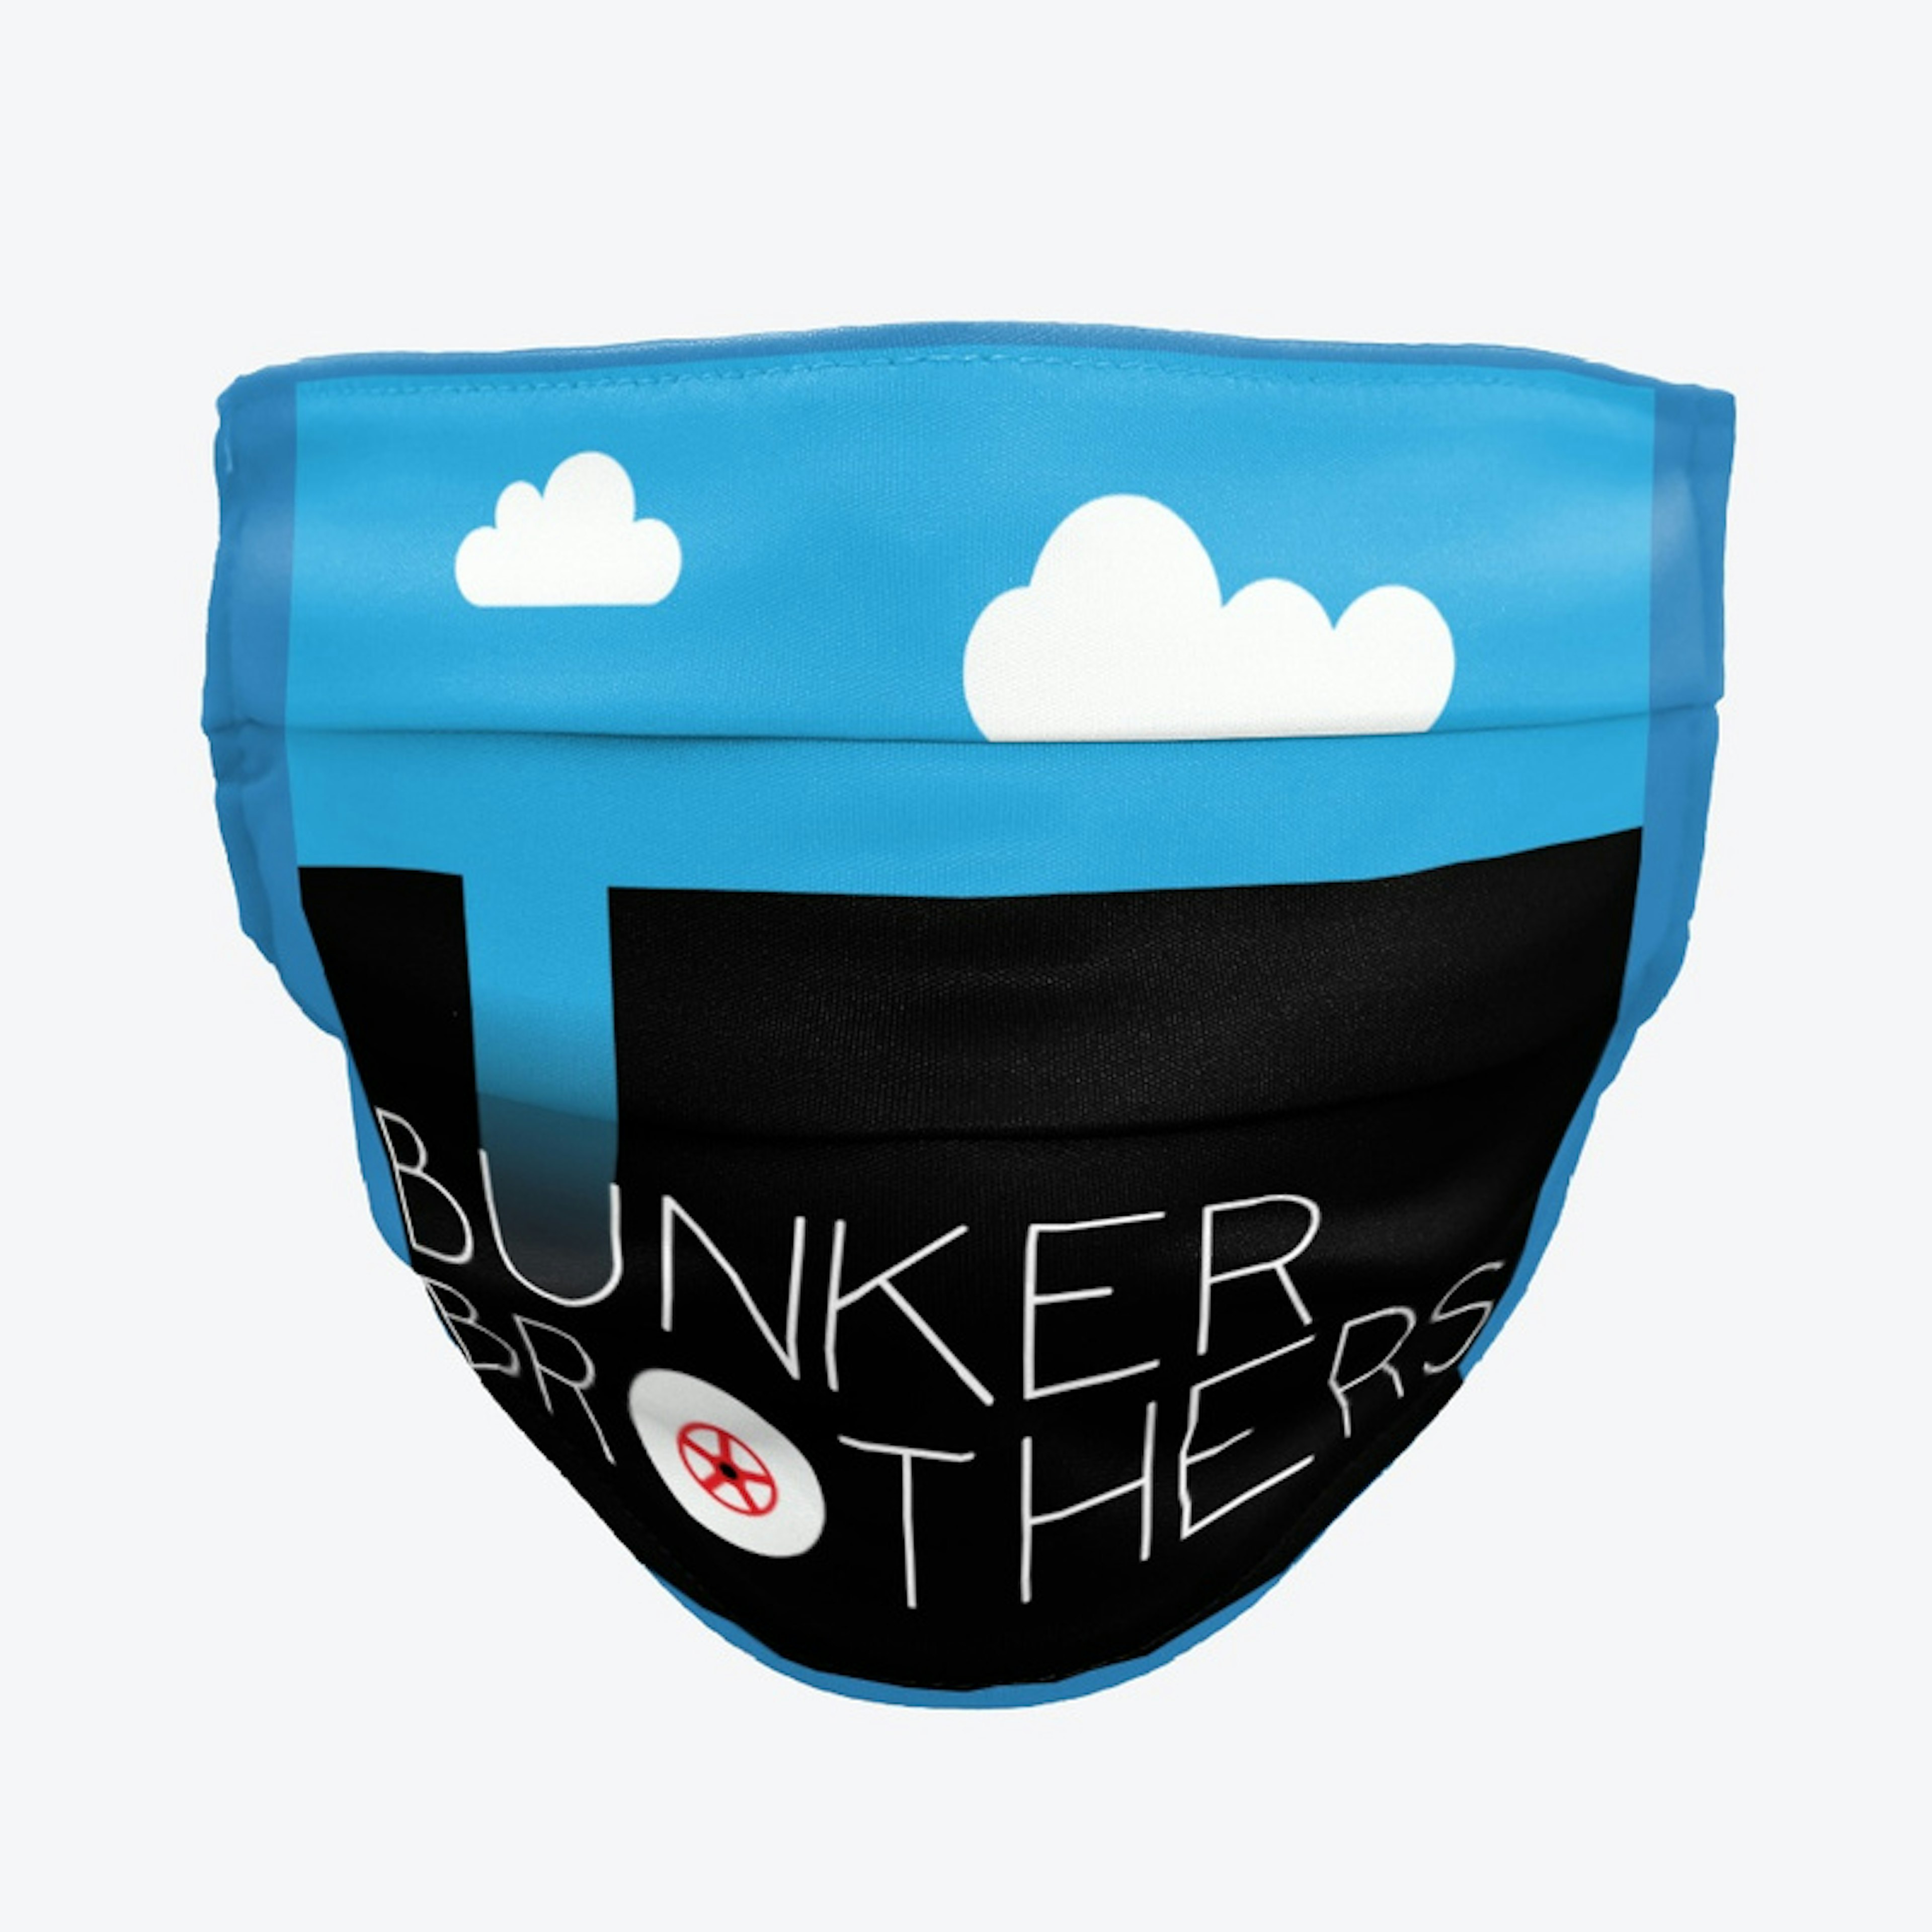 Bunker Brothers Face Mask